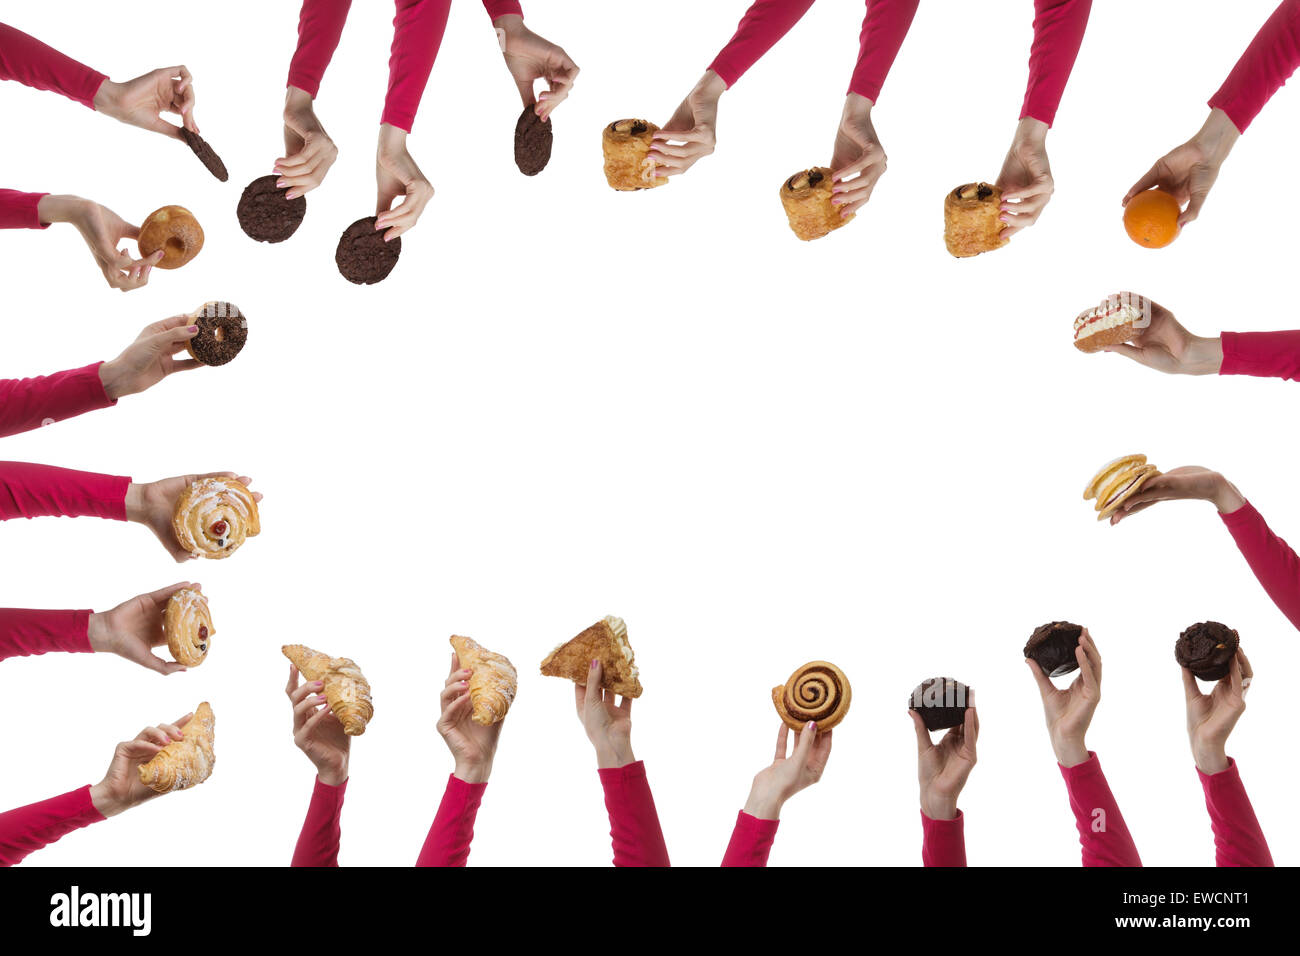 many hands holding different cakes, cut out on white background Stock Photo